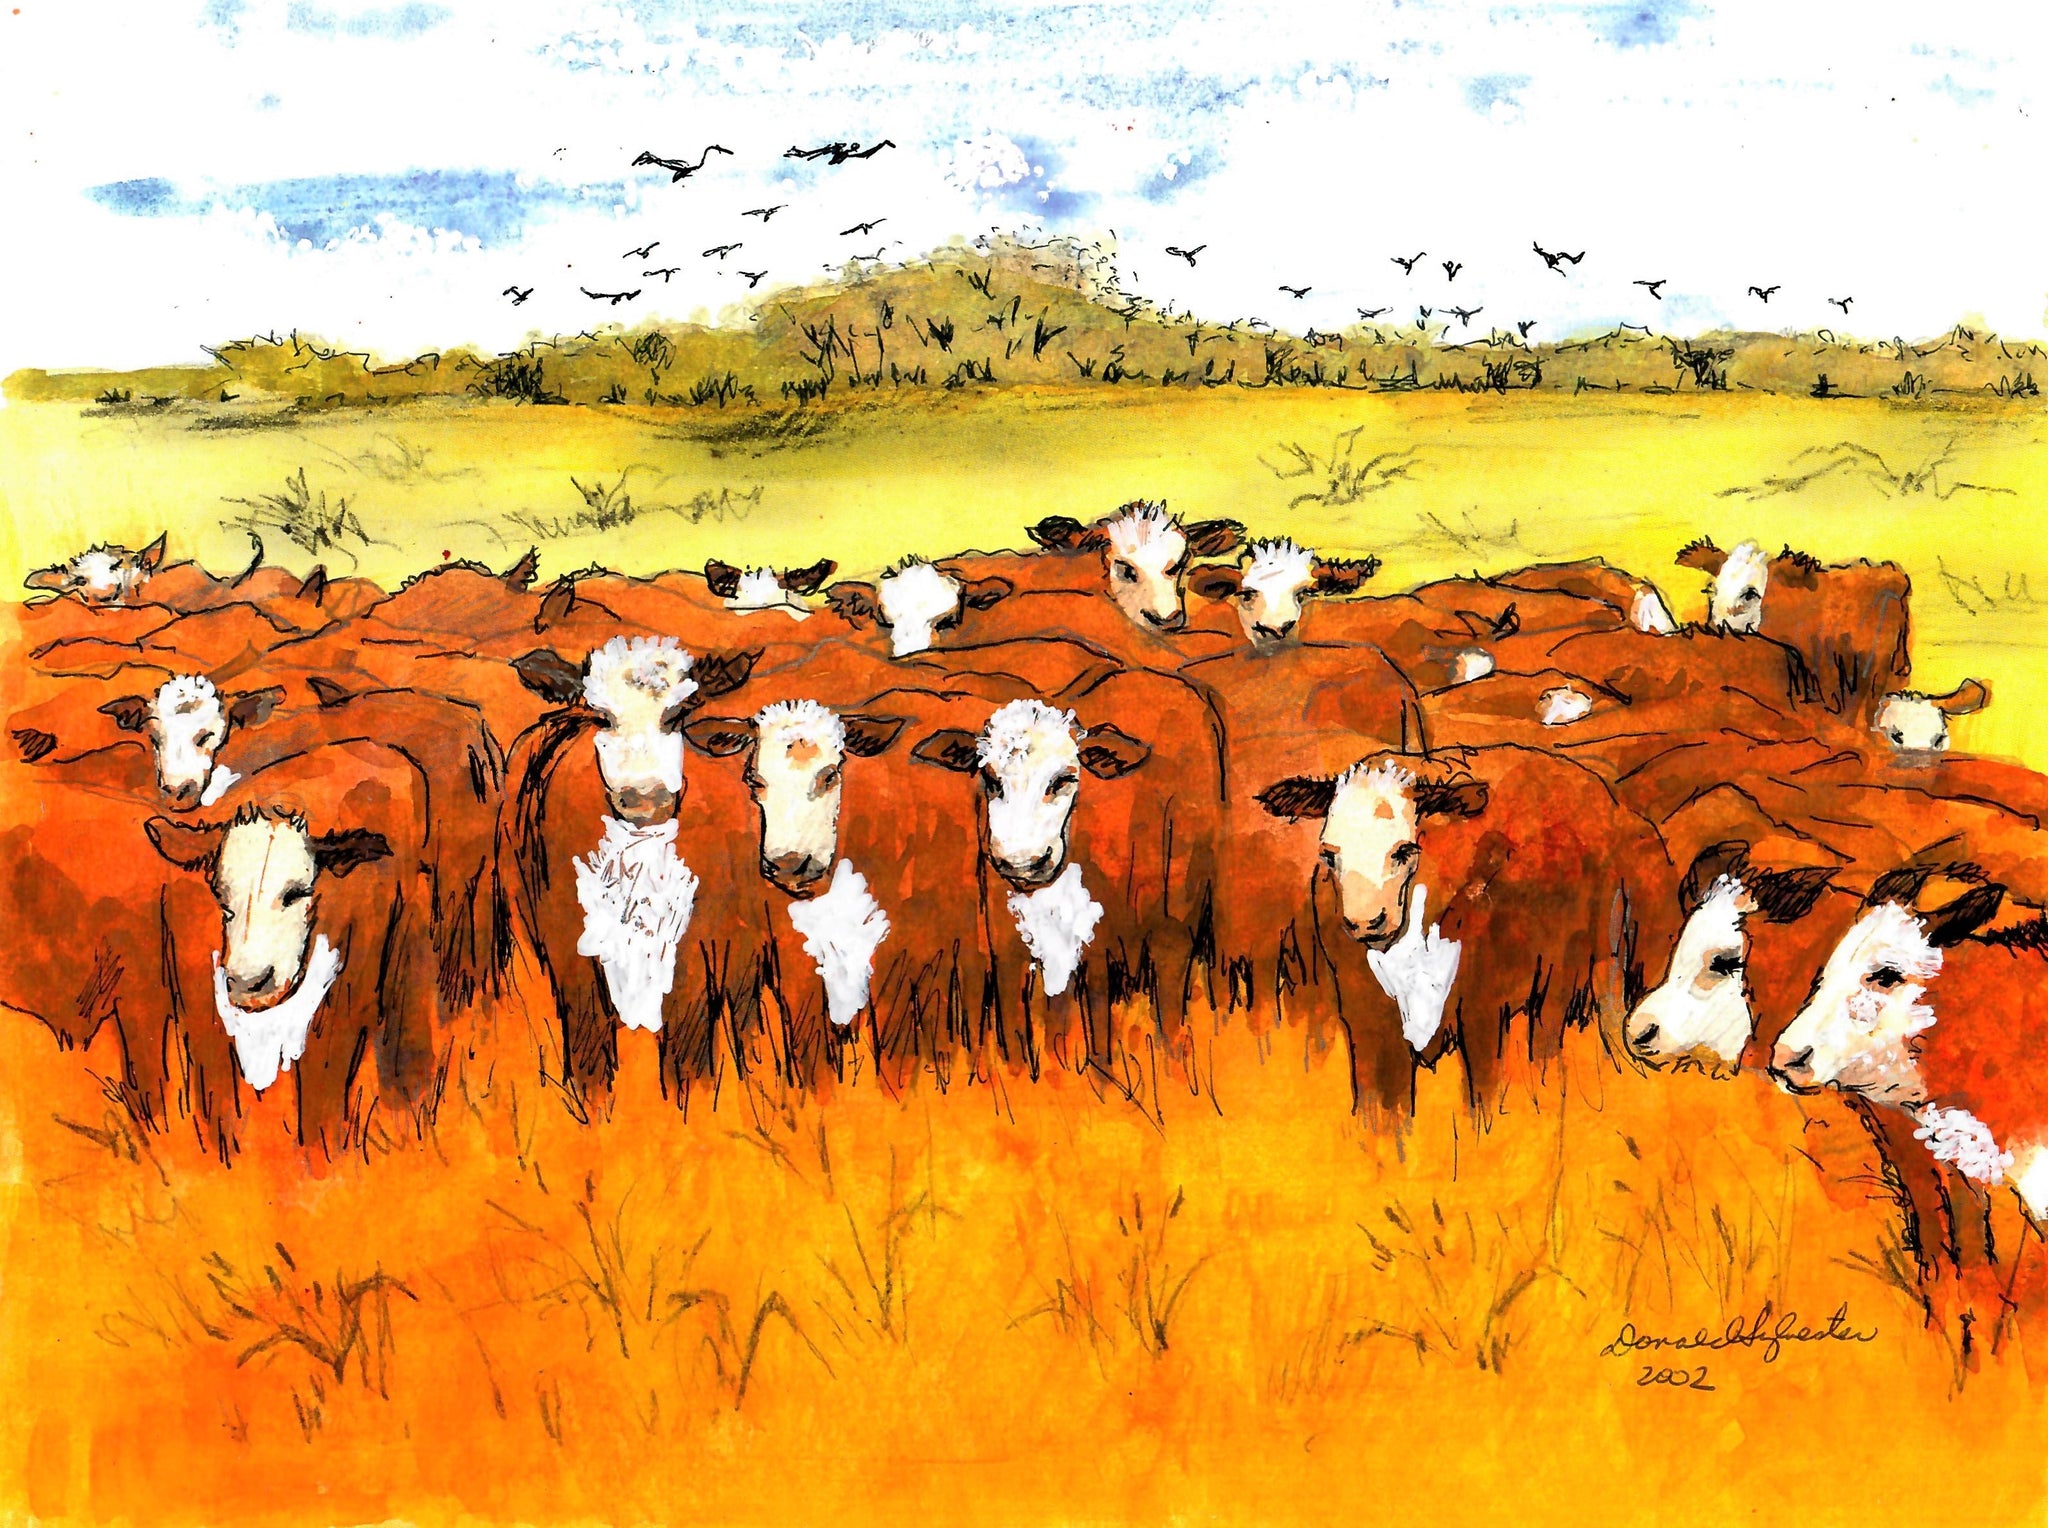 WESTERN - HERD OF HERTFORD CATTLE AND HOVERING BIRDS IN A COUNTRY FIELD